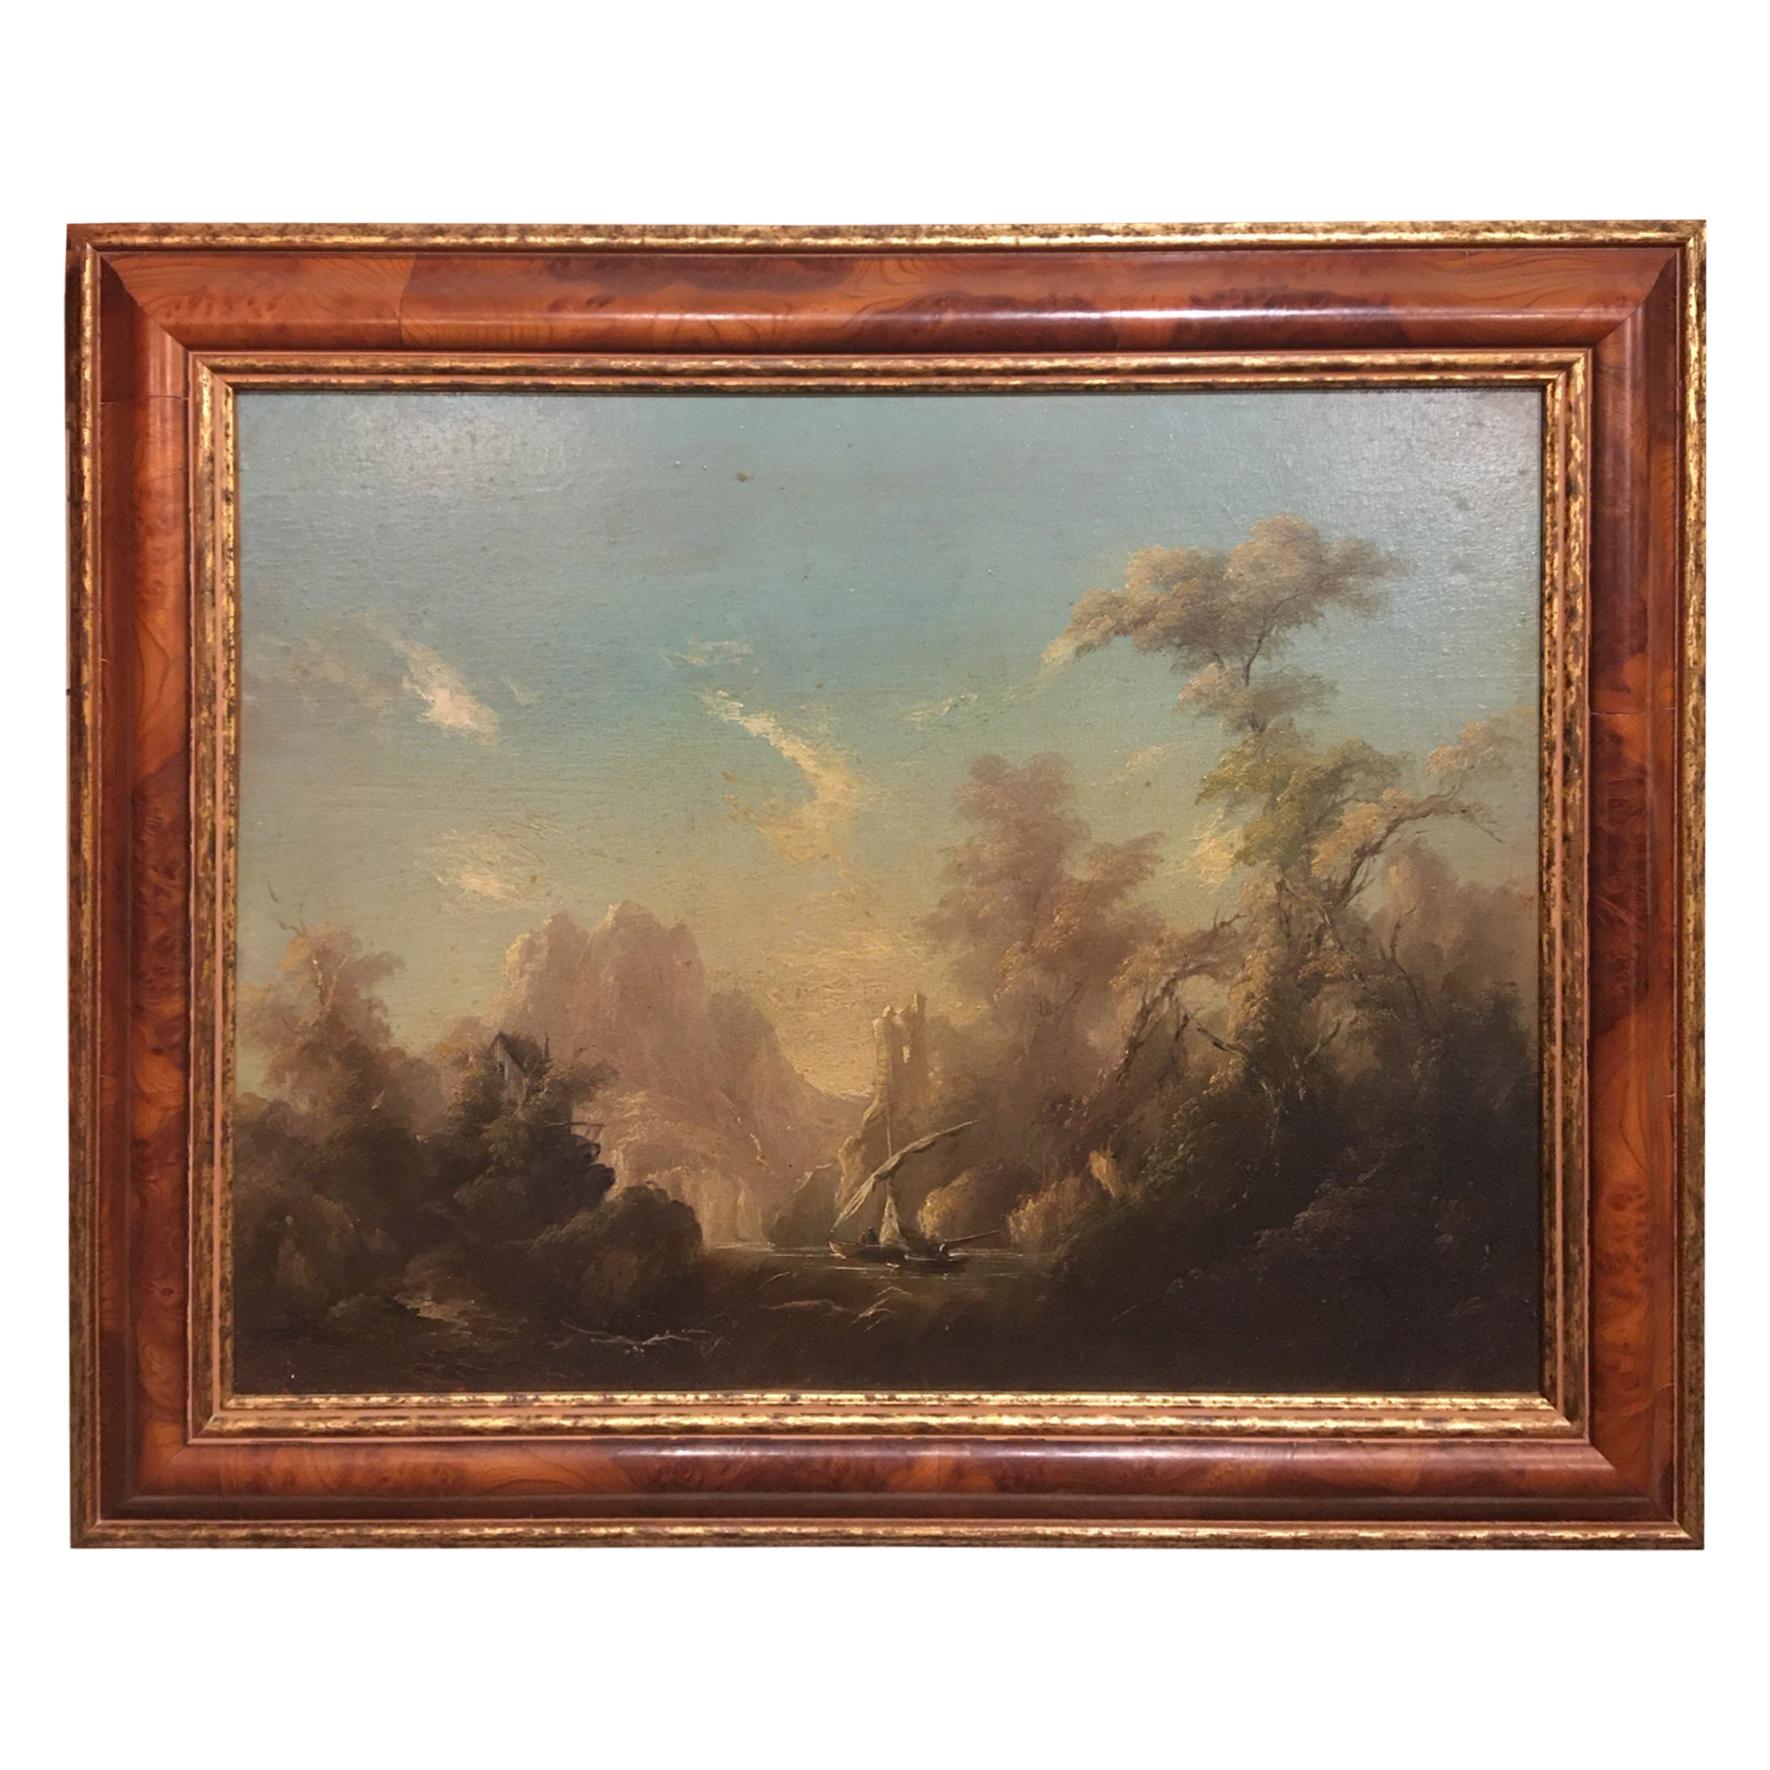 Framed Oil Painting on Canvas, Fisherman on Water, Unsigned, Late 19th Century